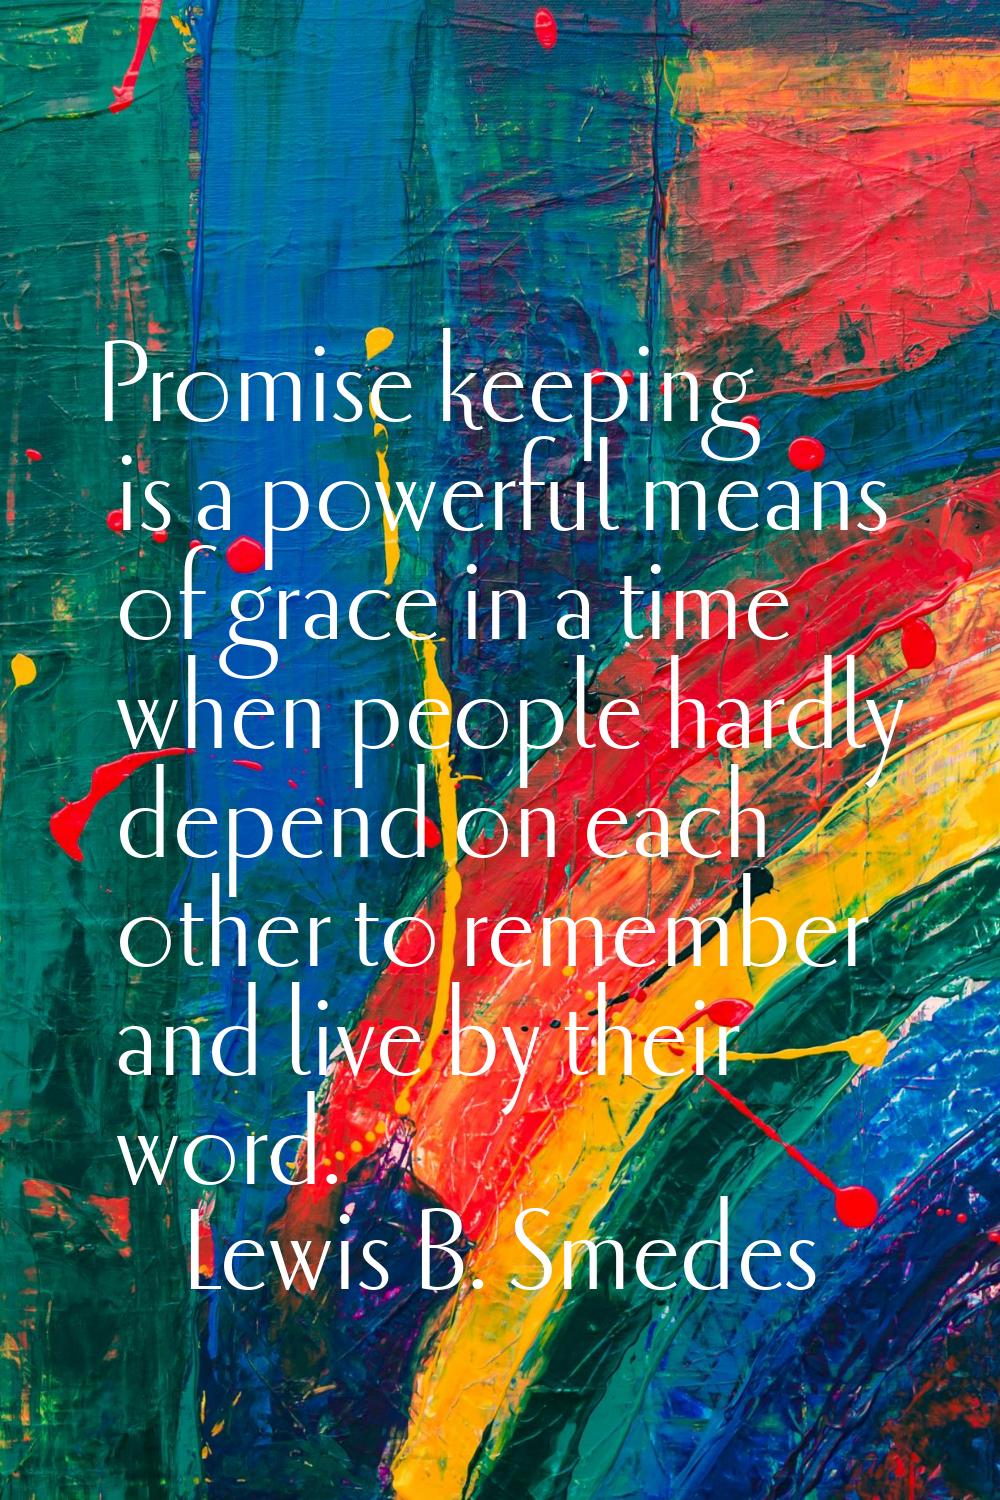 Promise keeping is a powerful means of grace in a time when people hardly depend on each other to r